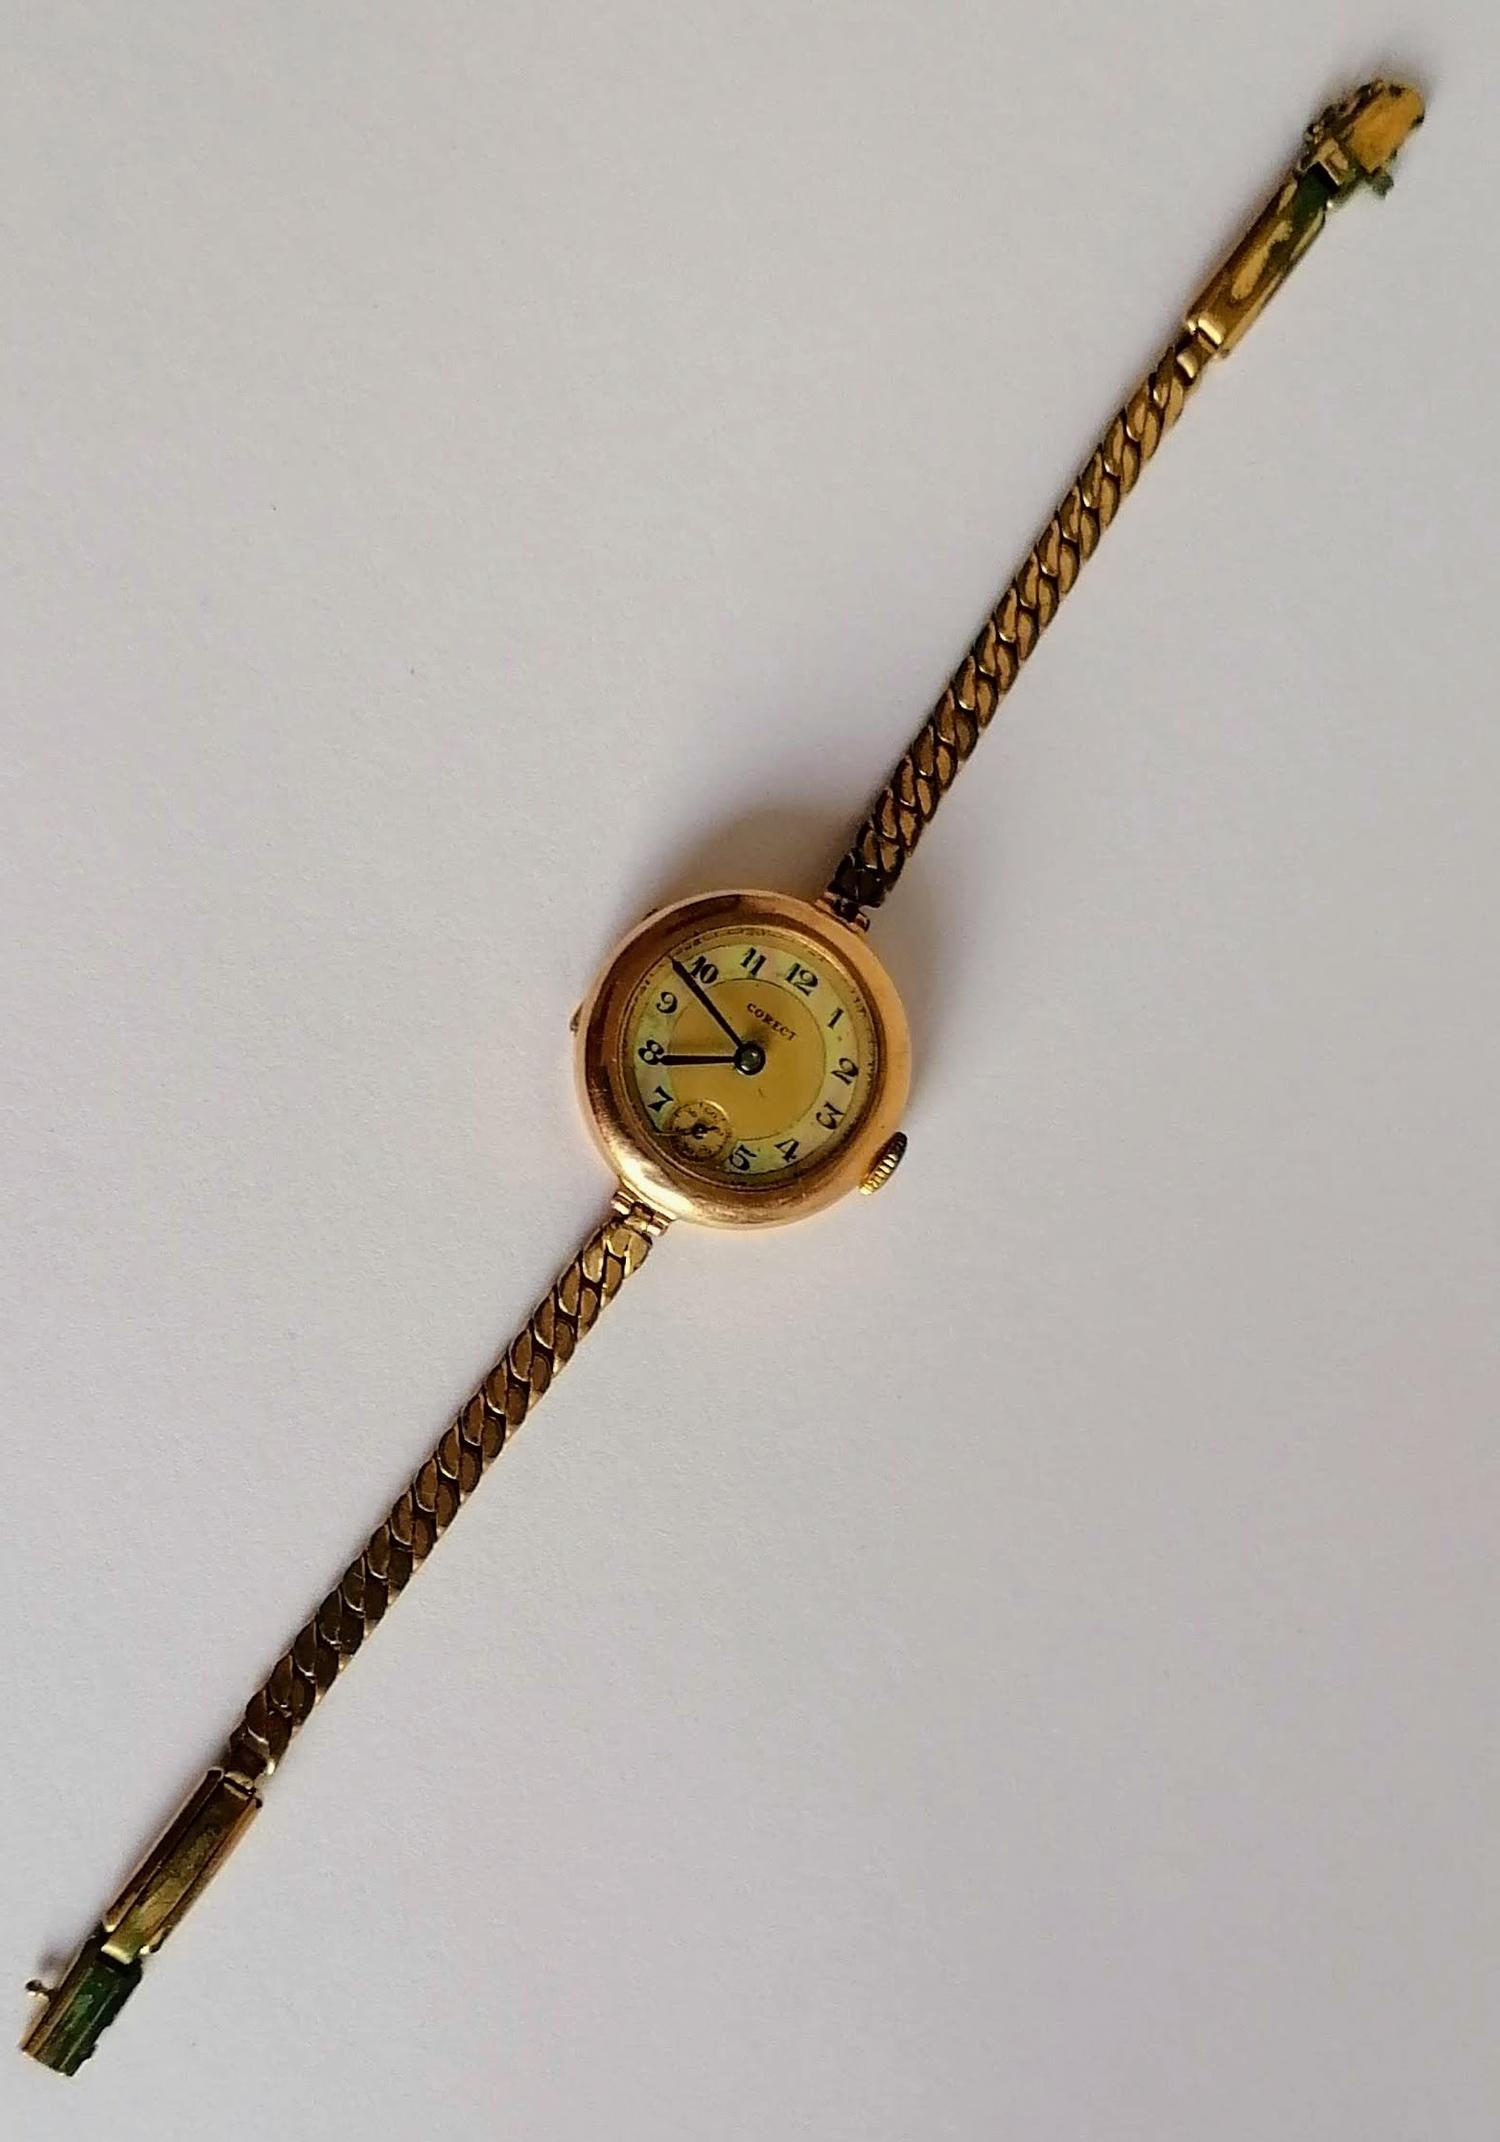 A mid-20th century Corect ladies wristwatch in a 14K yellow gold case, in working order, - Image 3 of 3